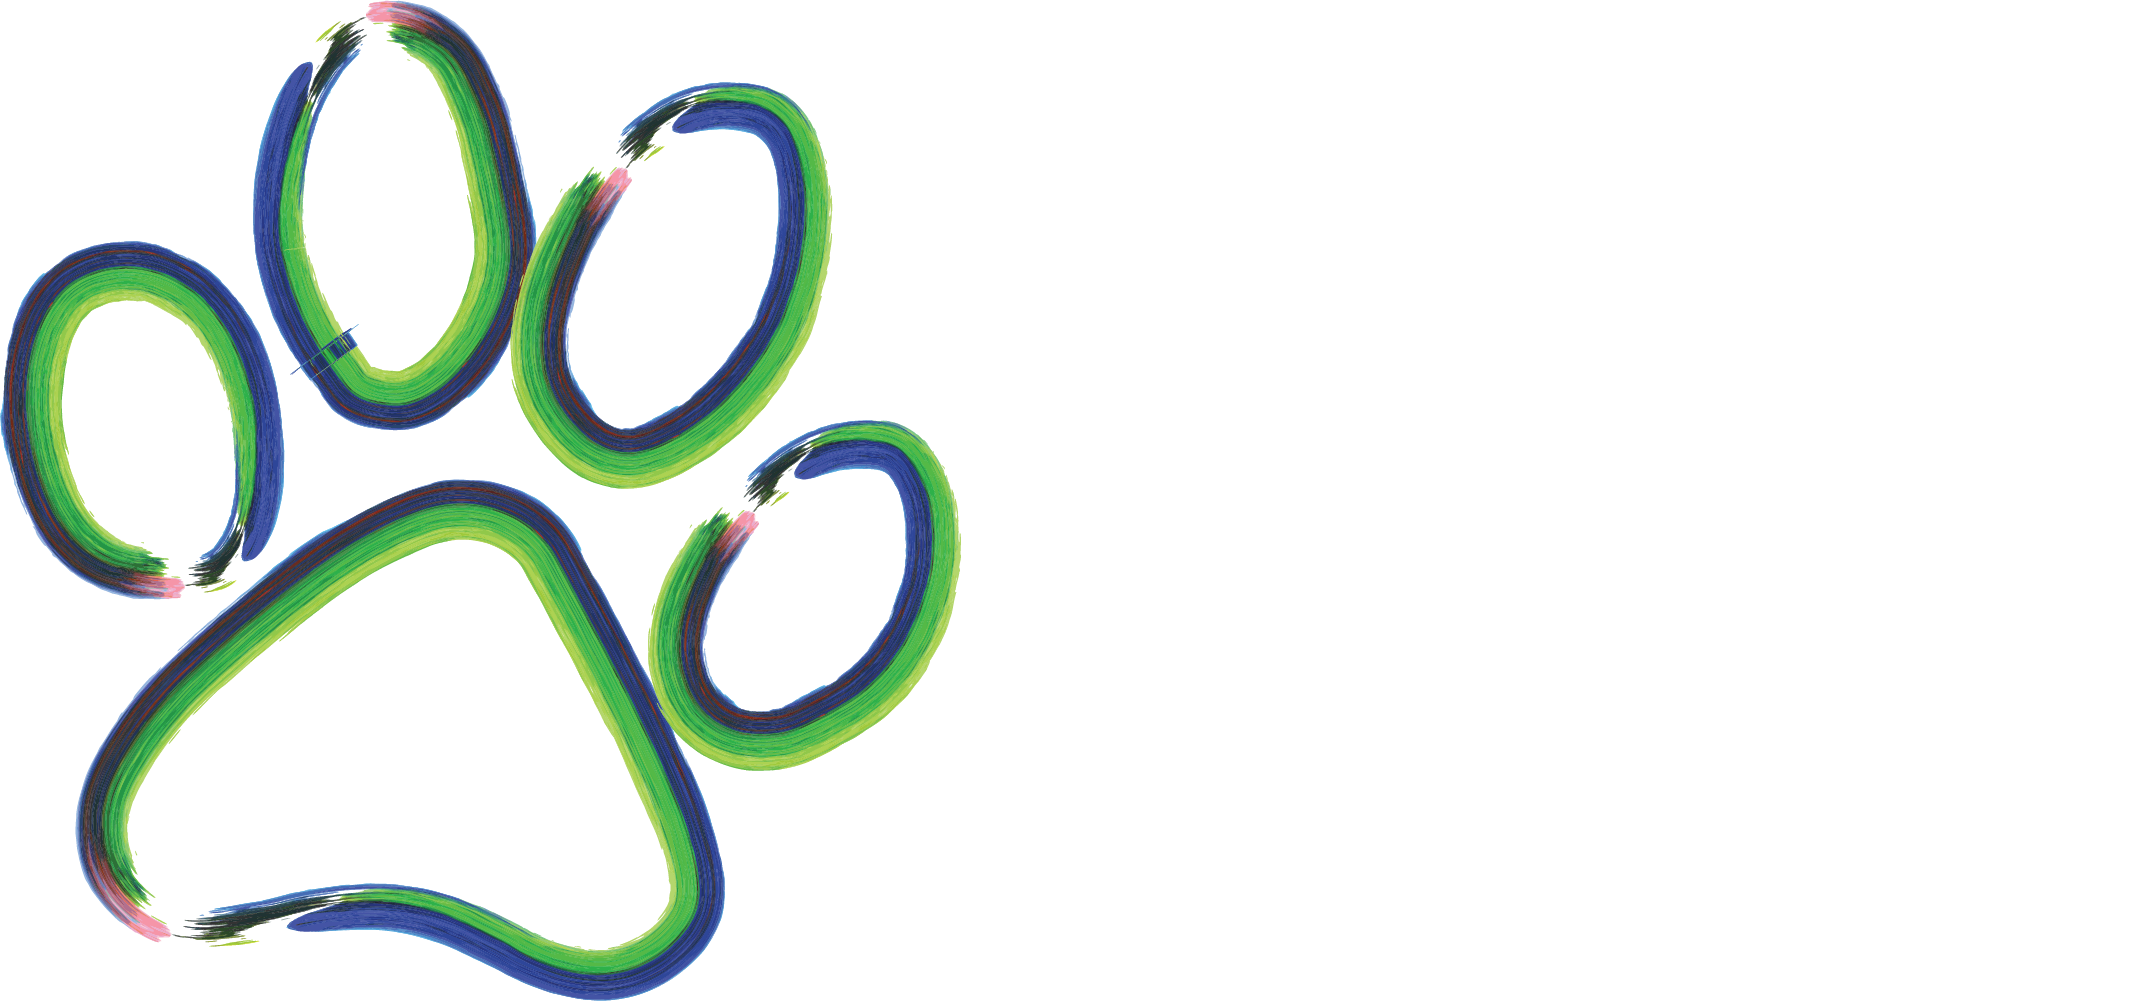 The Abstract Animal